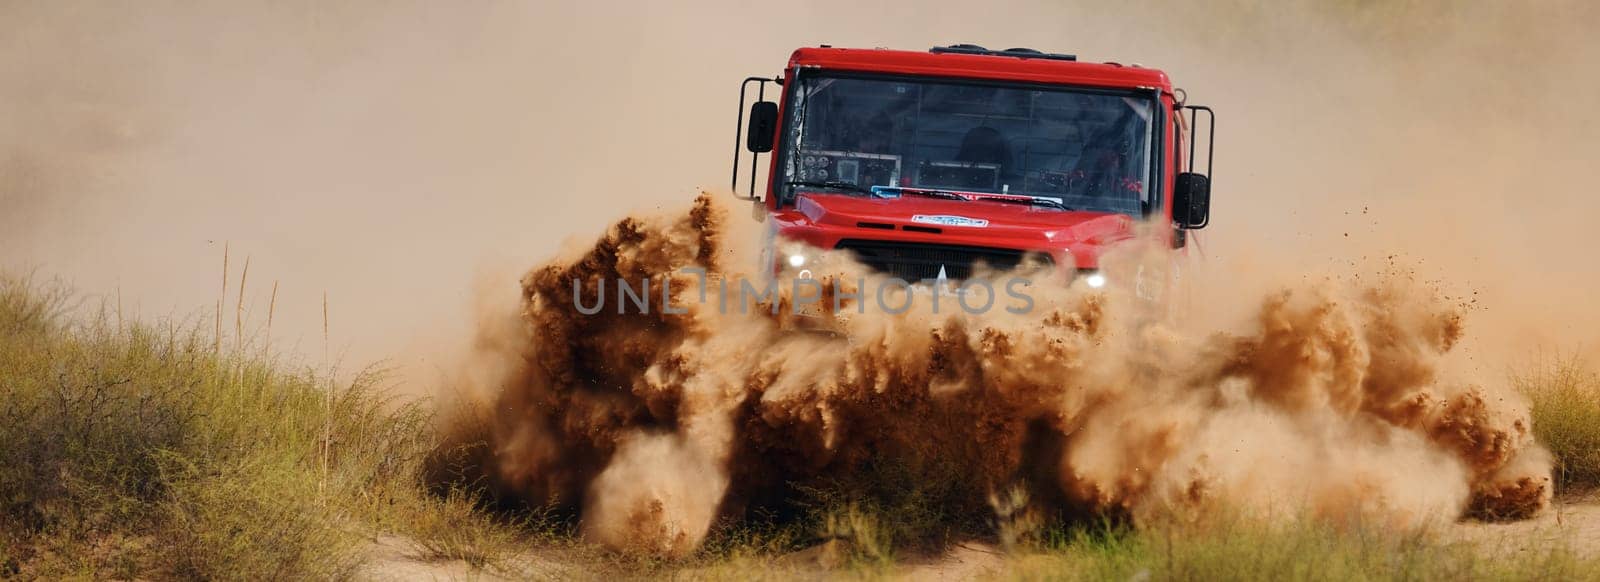 Extreme off-road racing. Sports truck MAZ Sport-auto team gets over the difficult part of the route during the Rally raid in sand. 14.07.2022 Kalmykia, Russia.